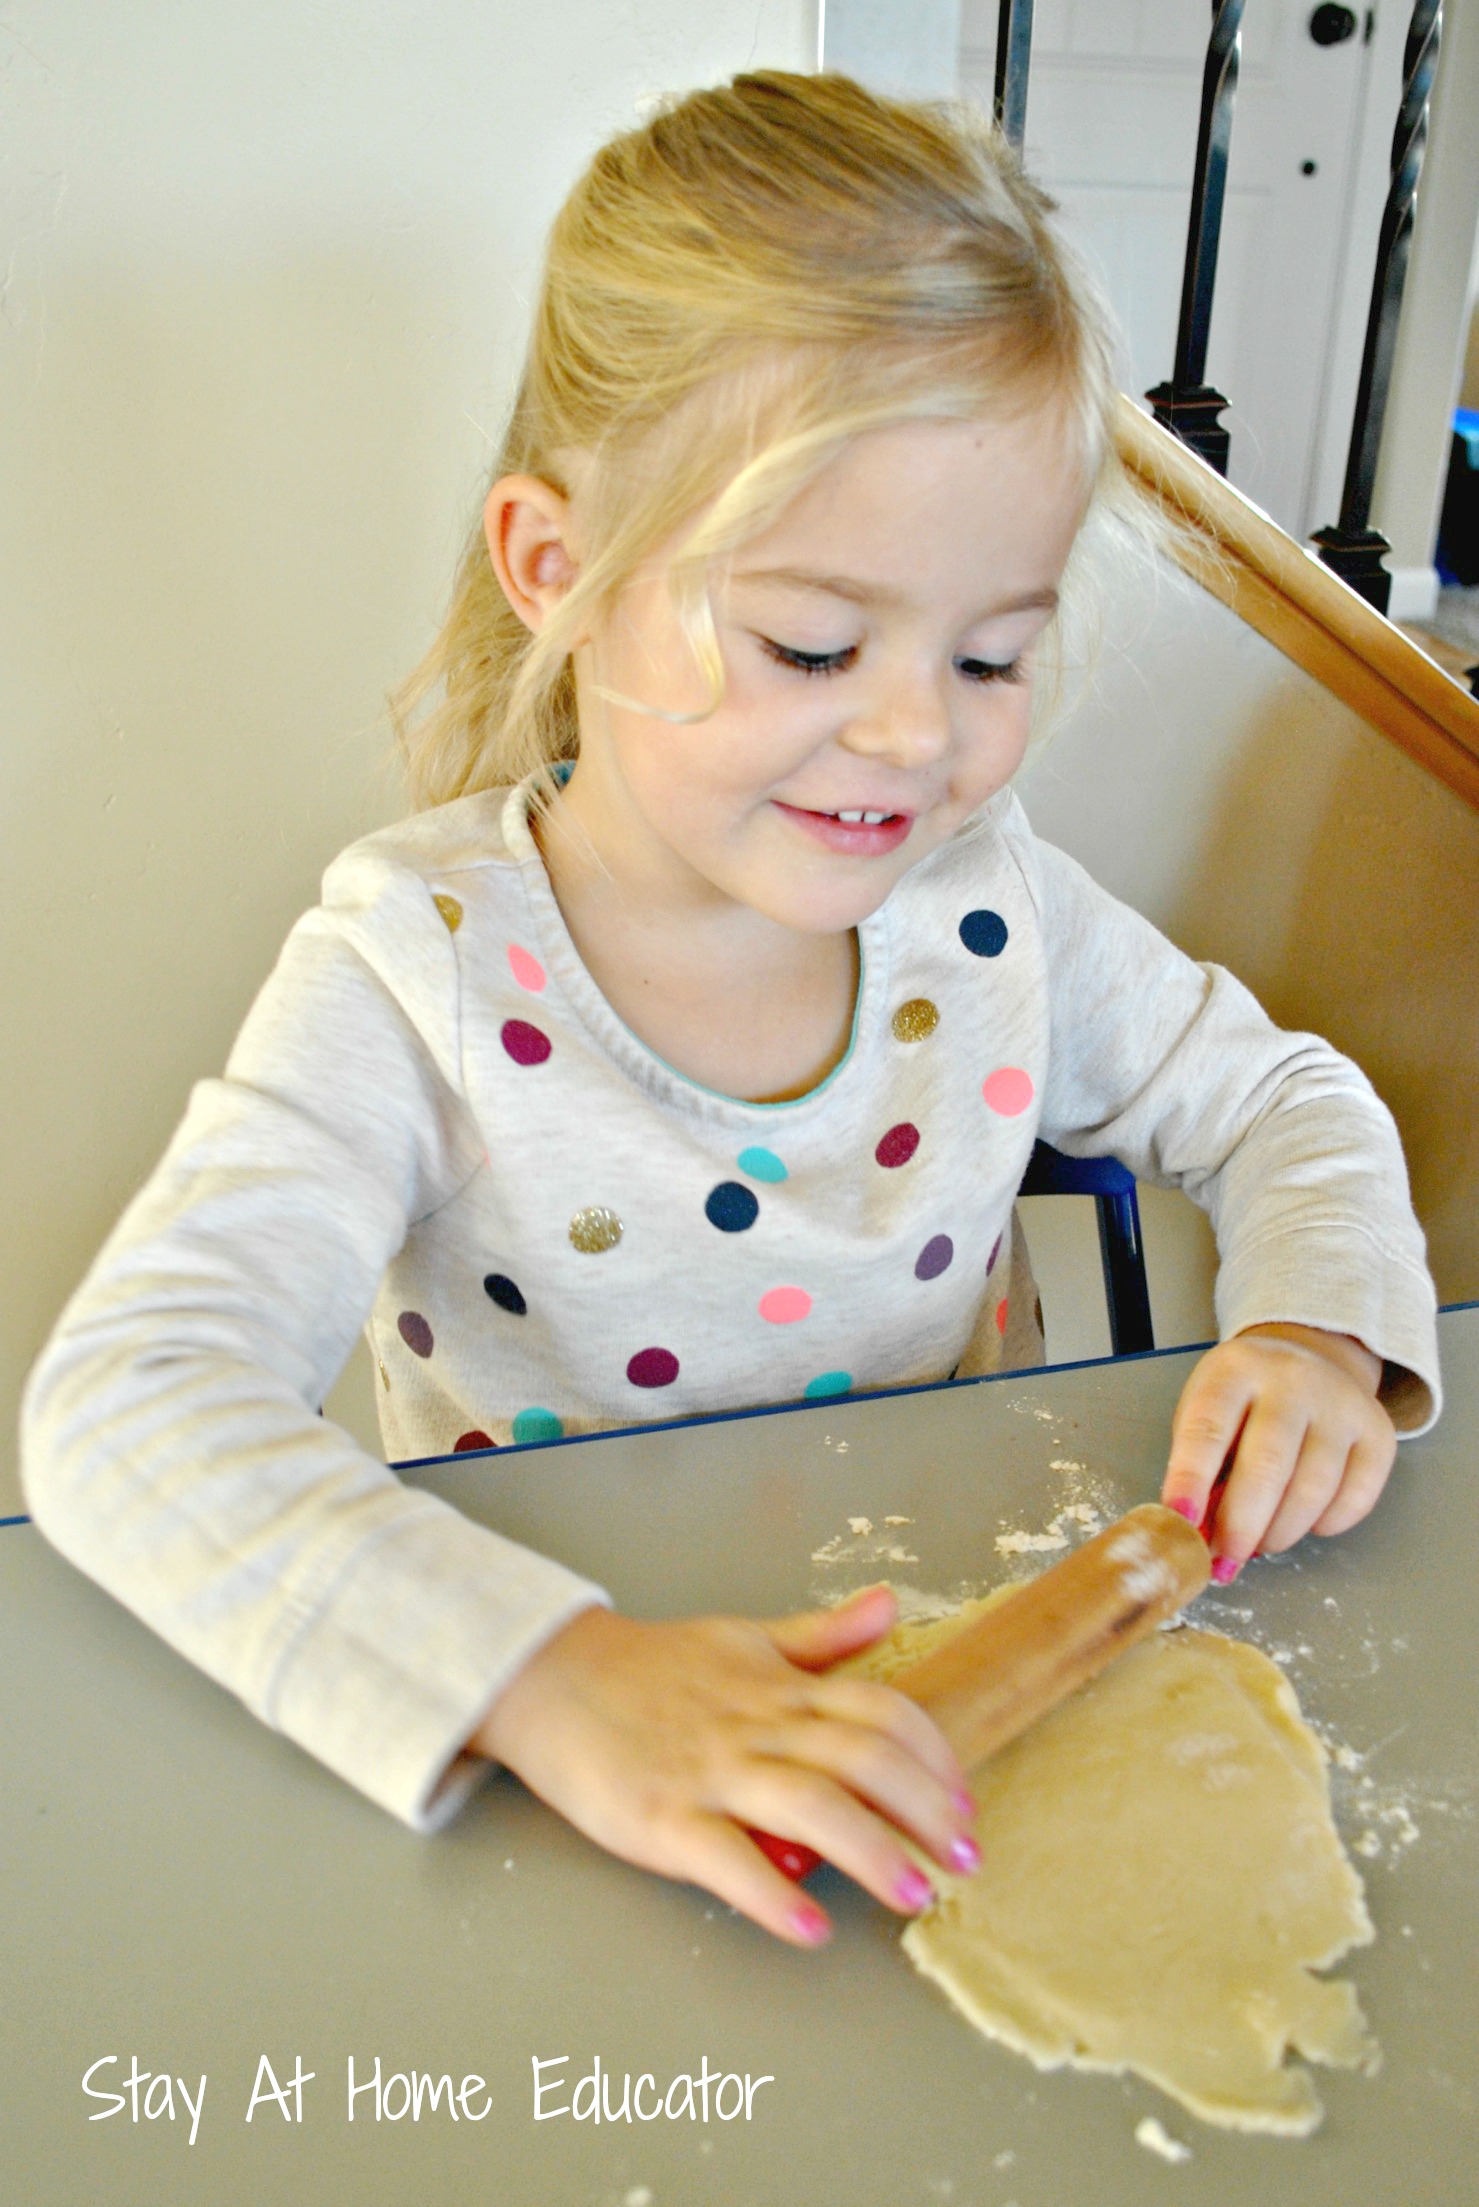 Preschooler rolling out pie dough for mini apple pies - Stay At Home Educator